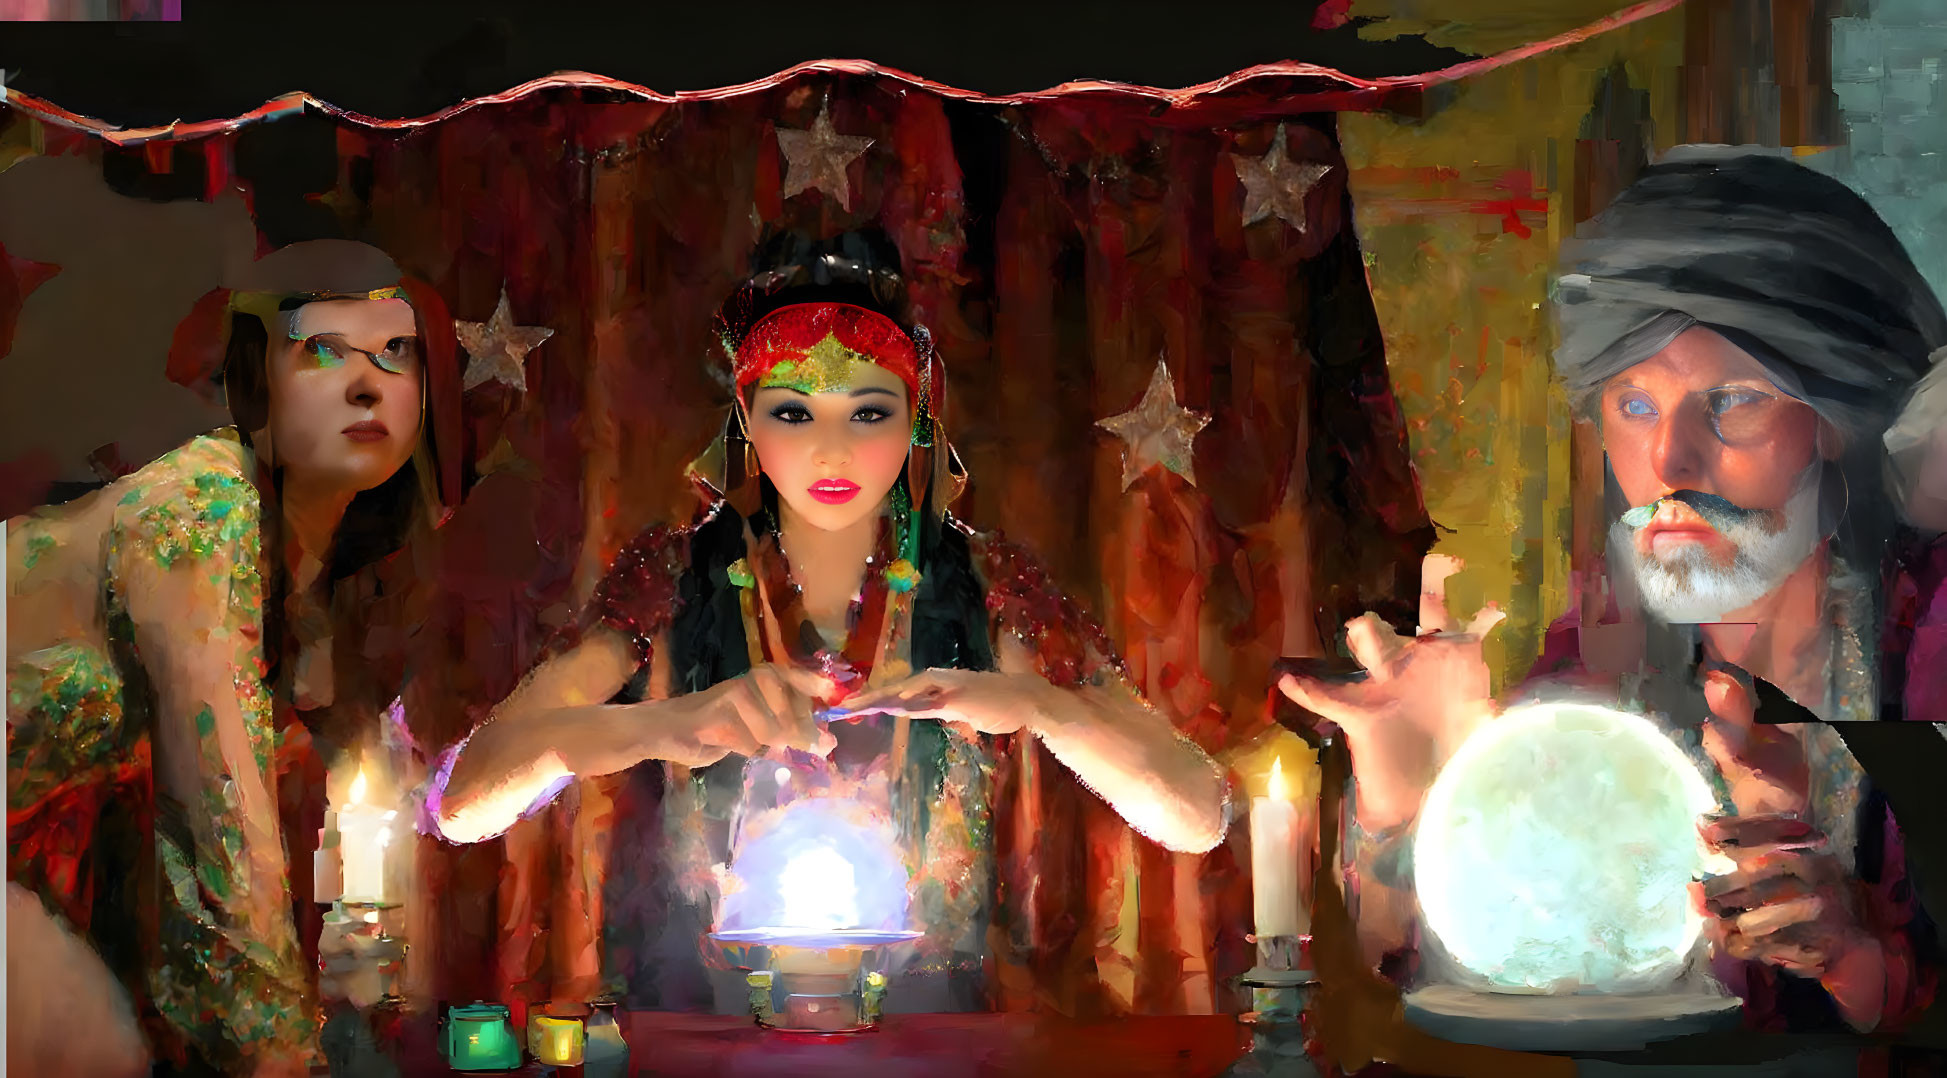 Three individuals in dimly lit room with glowing crystal ball and mystical decor.